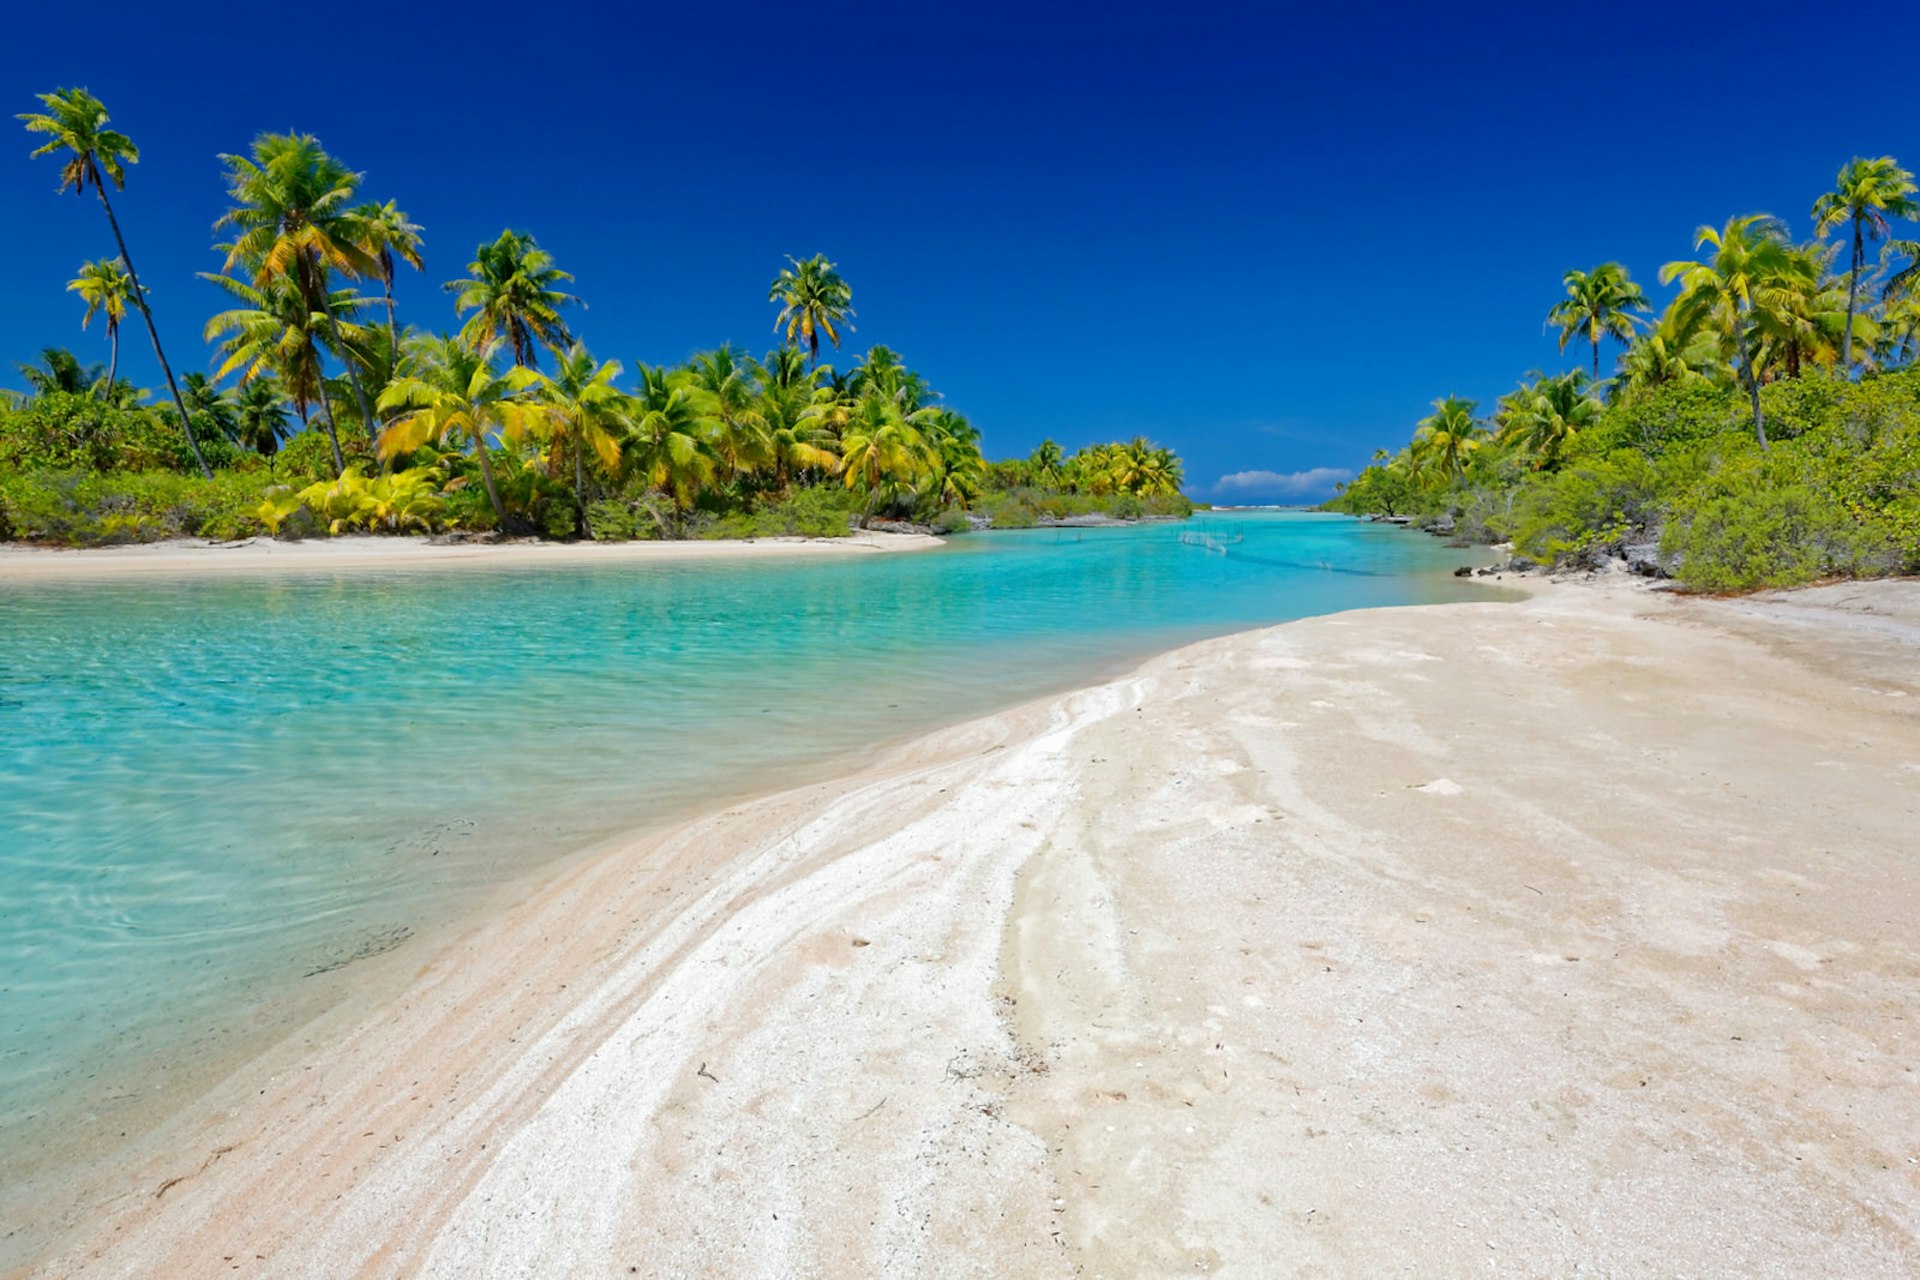 Making tracks along the lagoon in Mataiva © Jean-Bernard Carillet / Lonely Planet